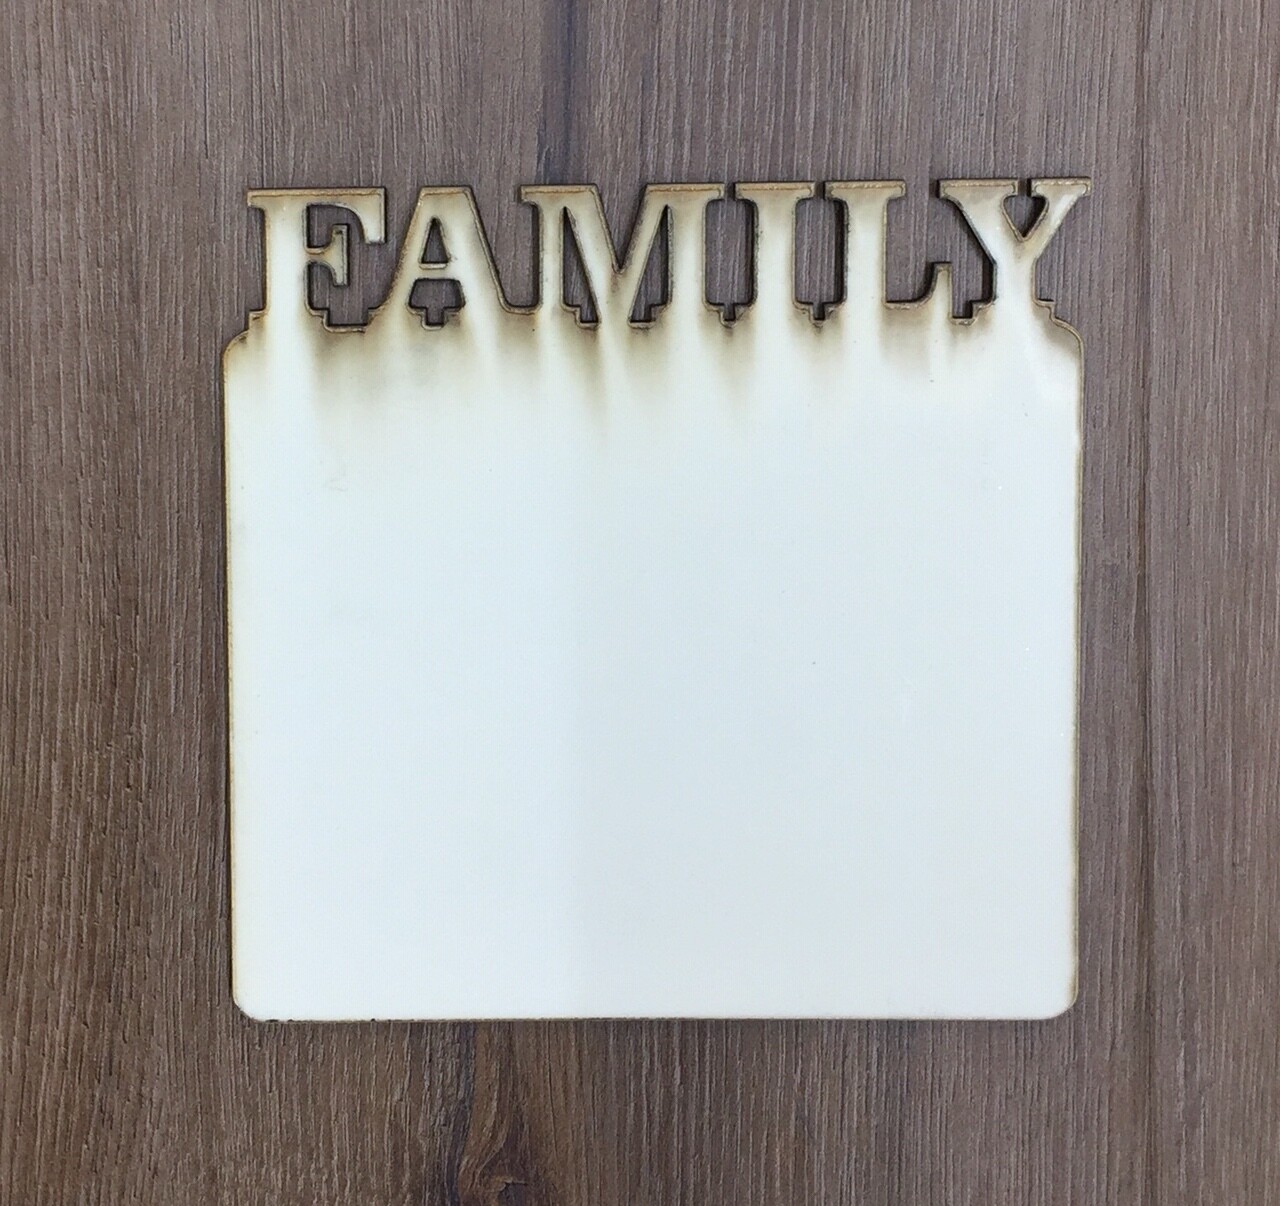 FAMILY Word Board - large